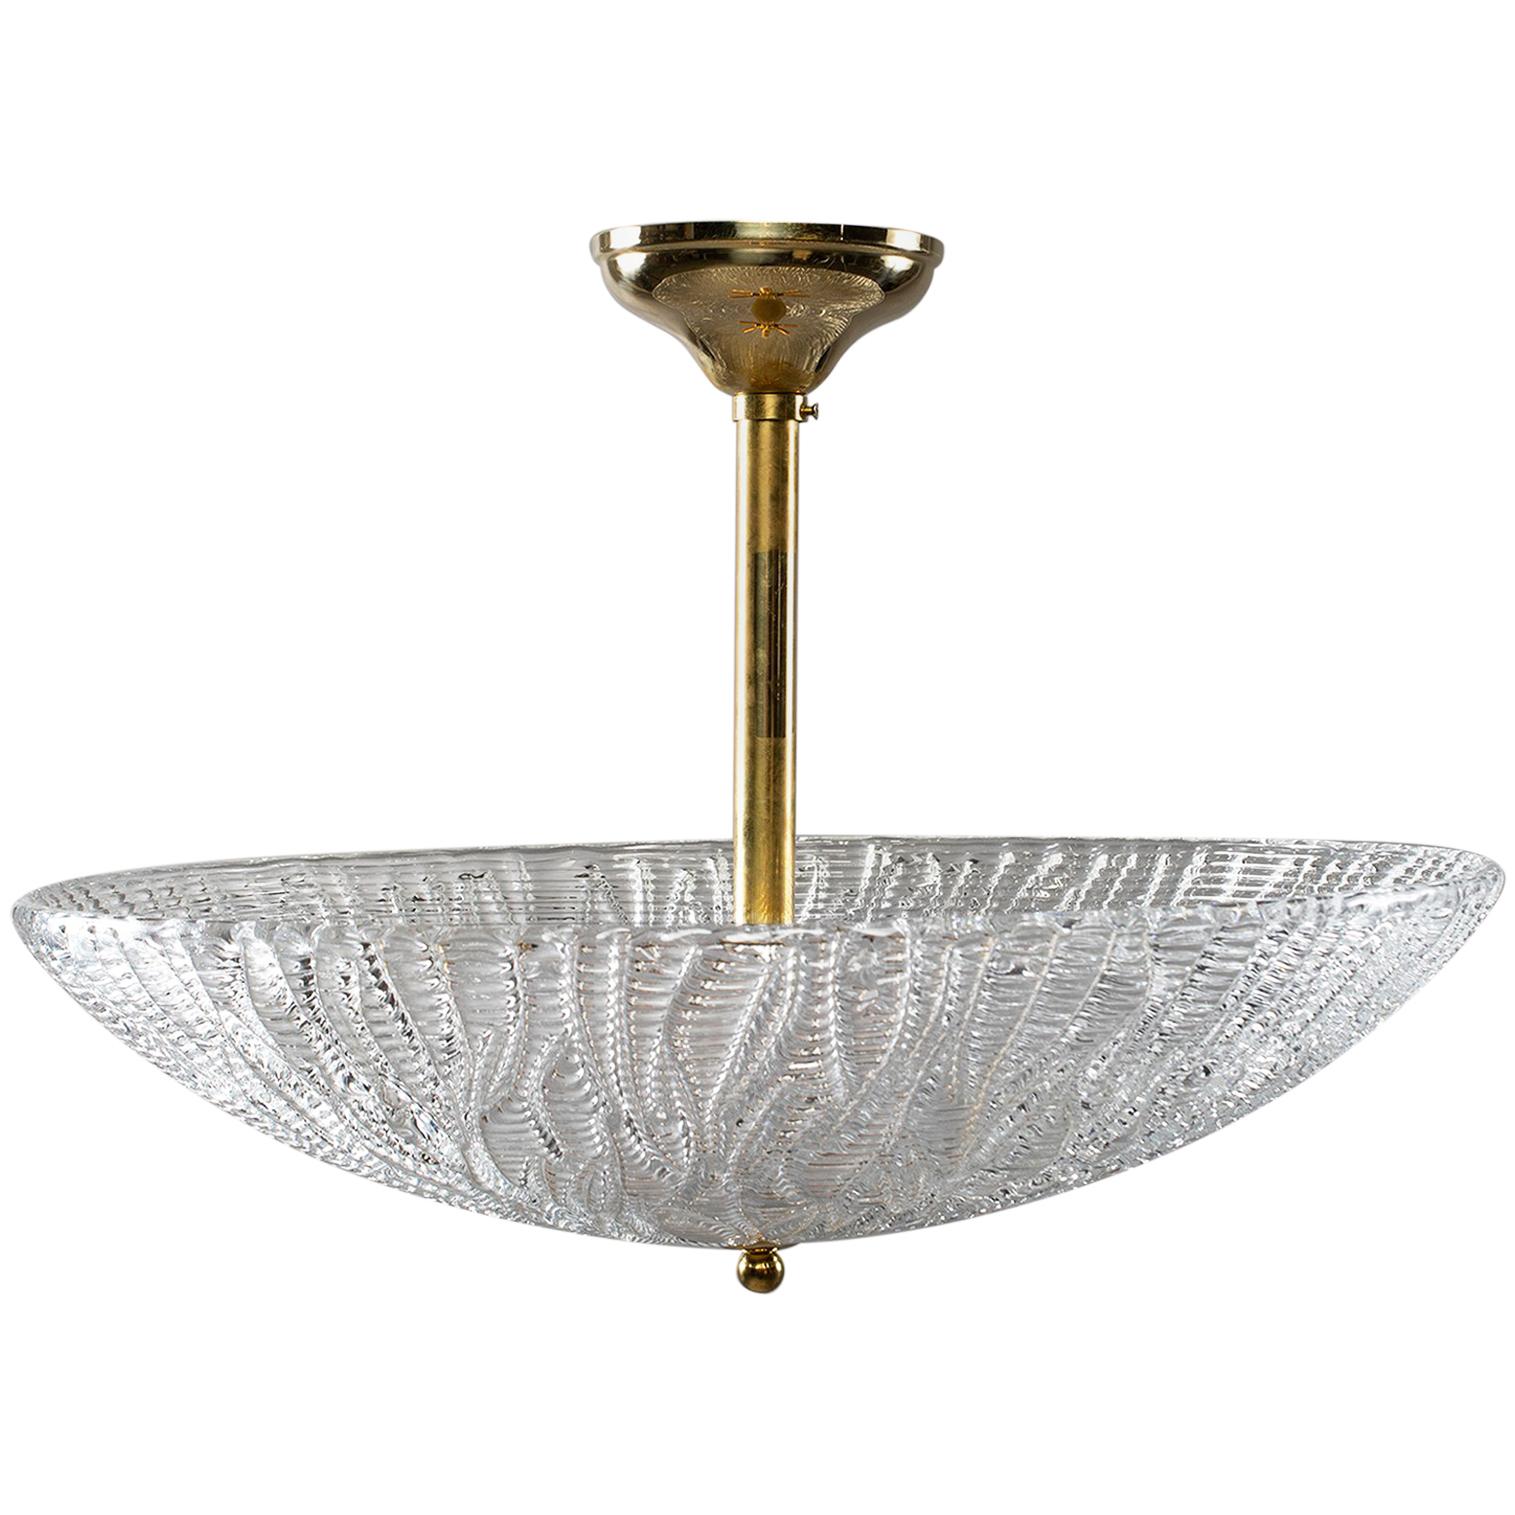 Barovier and Toso Umbrella Form Fixture with Brass Fittings